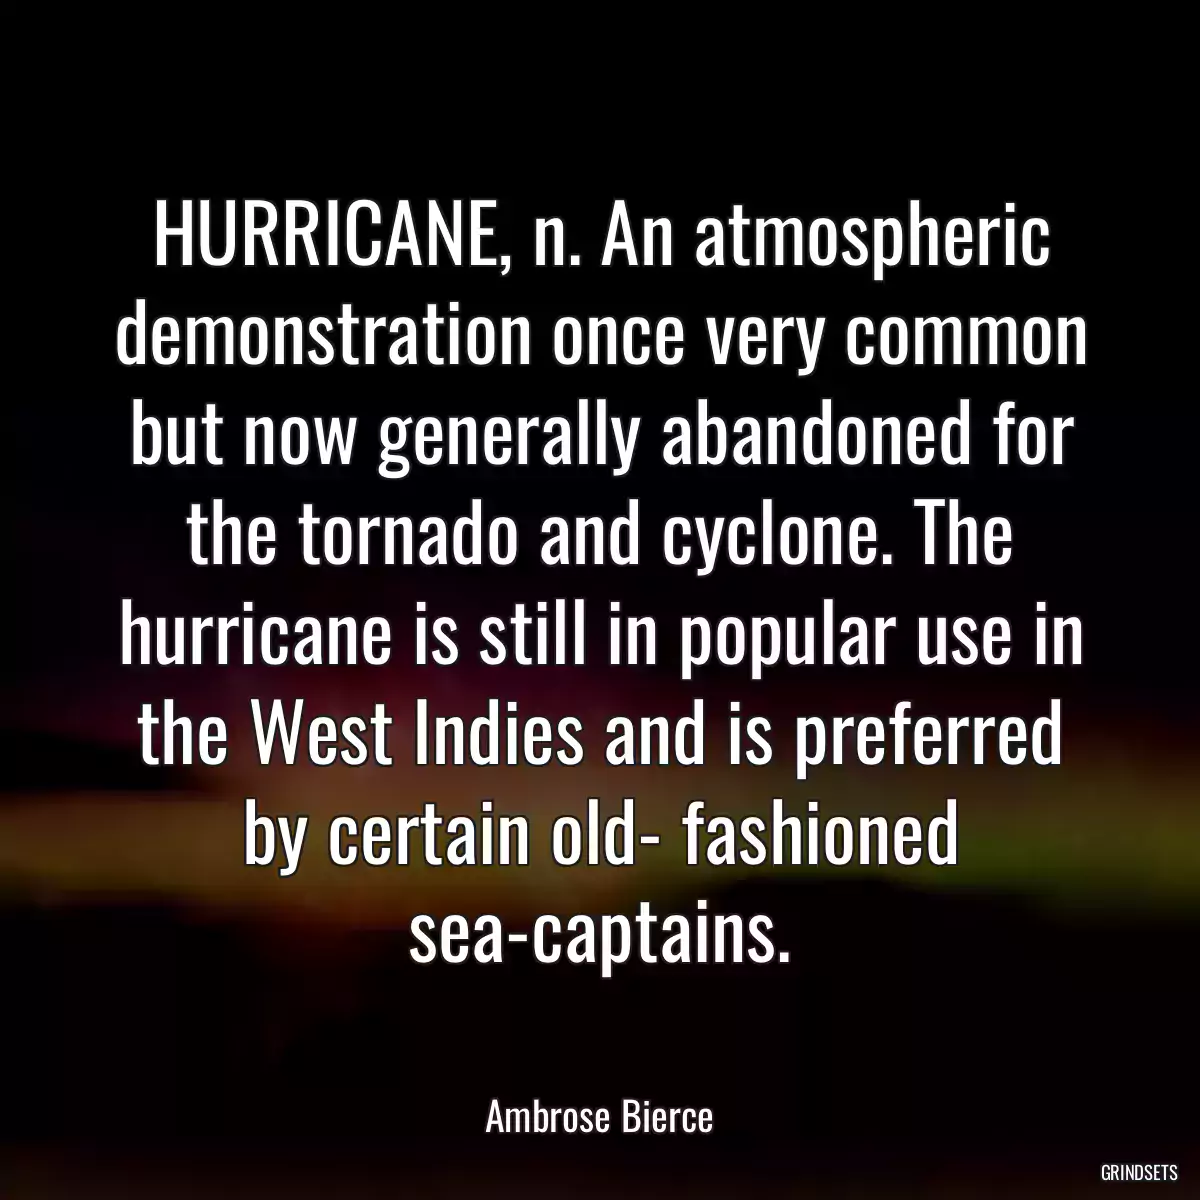 HURRICANE, n. An atmospheric demonstration once very common but now generally abandoned for the tornado and cyclone. The hurricane is still in popular use in the West Indies and is preferred by certain old- fashioned sea-captains.